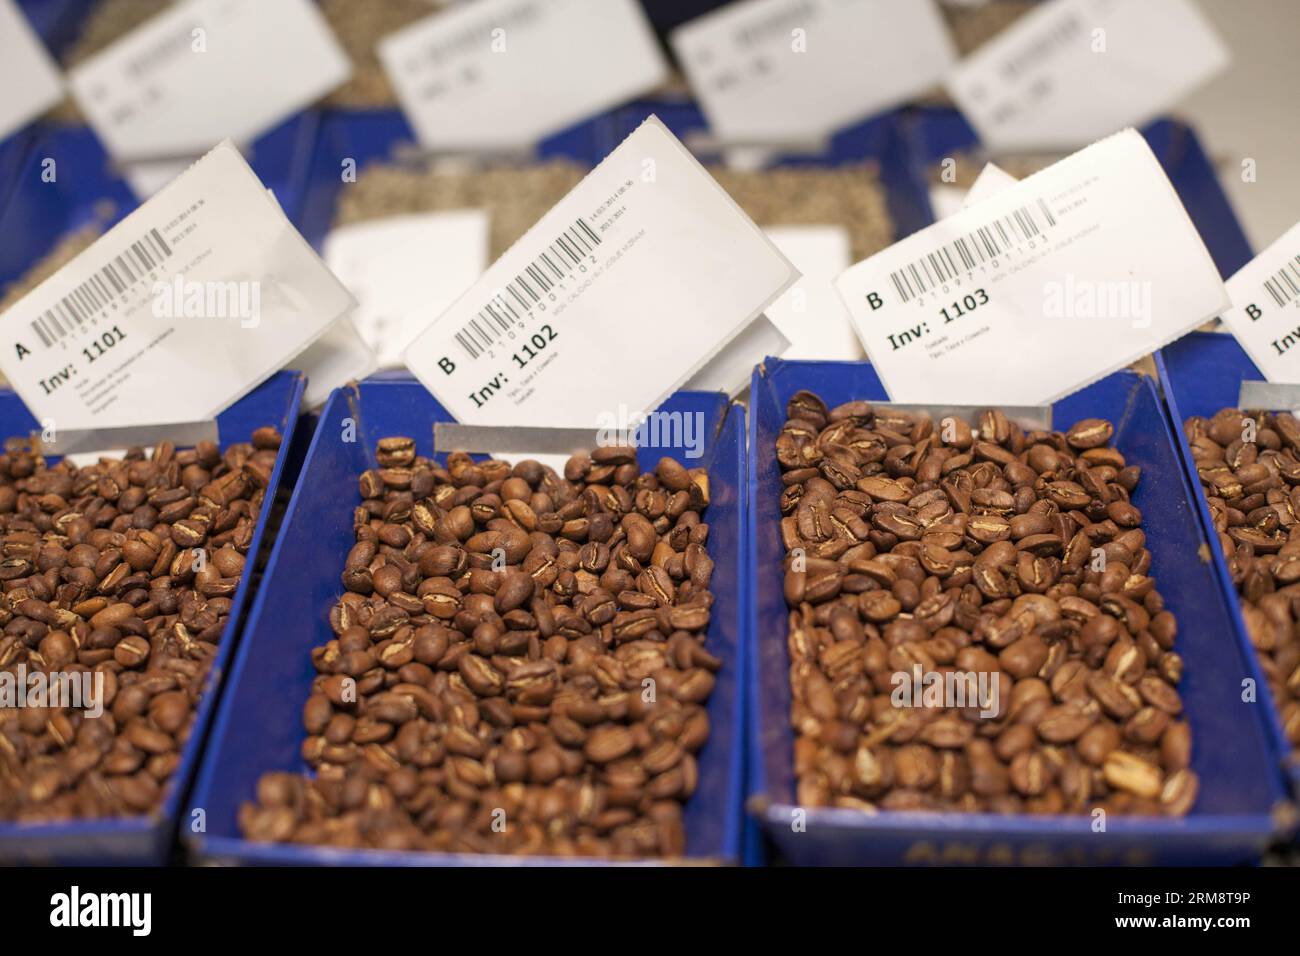 GUATEMALA CITY, April 25, 2014 (Xinhua) -- Coffee grains are placed for classification in Guatemala City, capital of Guatemala, on April 25, 2014. The Guatemalan coffee exportations have decreased 15 percent, compared to the last years harvest, due to the rust fungus, affecting the crops. According to ANACAFE, 70 percent of the Guatemalan Coffeein infected with rust. (Xinhua/Luis Echeverria) (rt) (sp) GUATEMALA-GUATEMALA CITY-INDUSTRY-COFFEE PUBLICATIONxNOTxINxCHN   Guatemala City April 25 2014 XINHUA Coffee grains are placed for classification in Guatemala City Capital of Guatemala ON April 2 Stock Photo